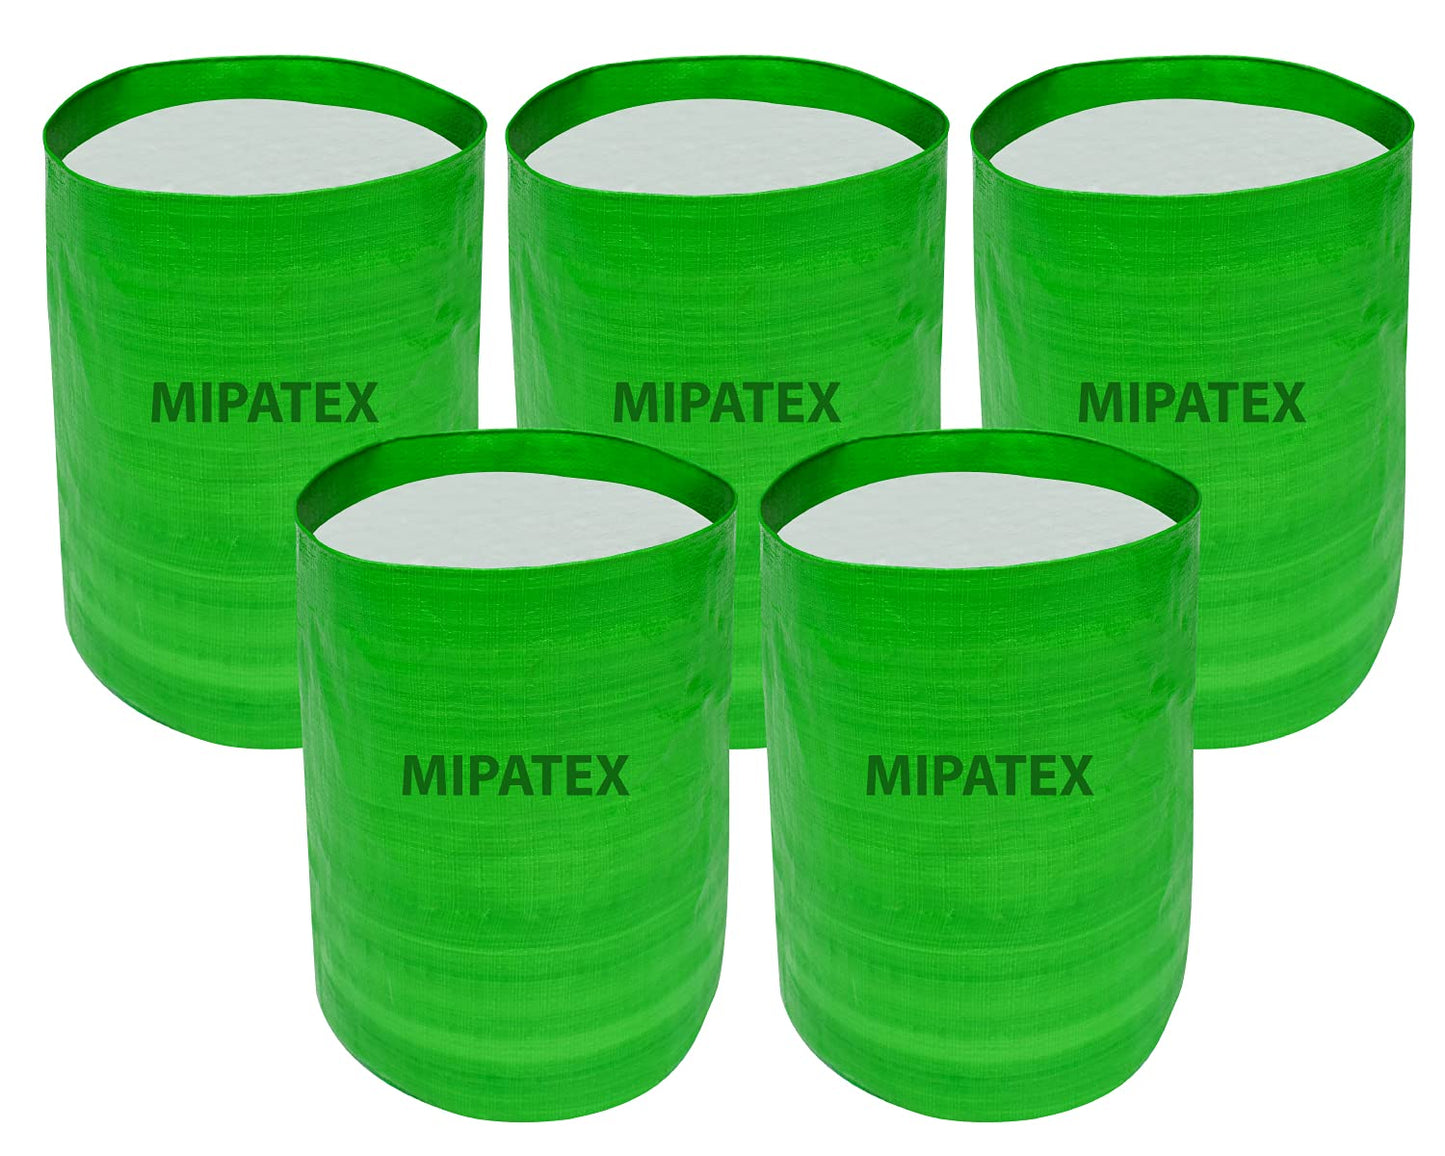 Mipatex Fabric Grow Bags (18x30 Inches)